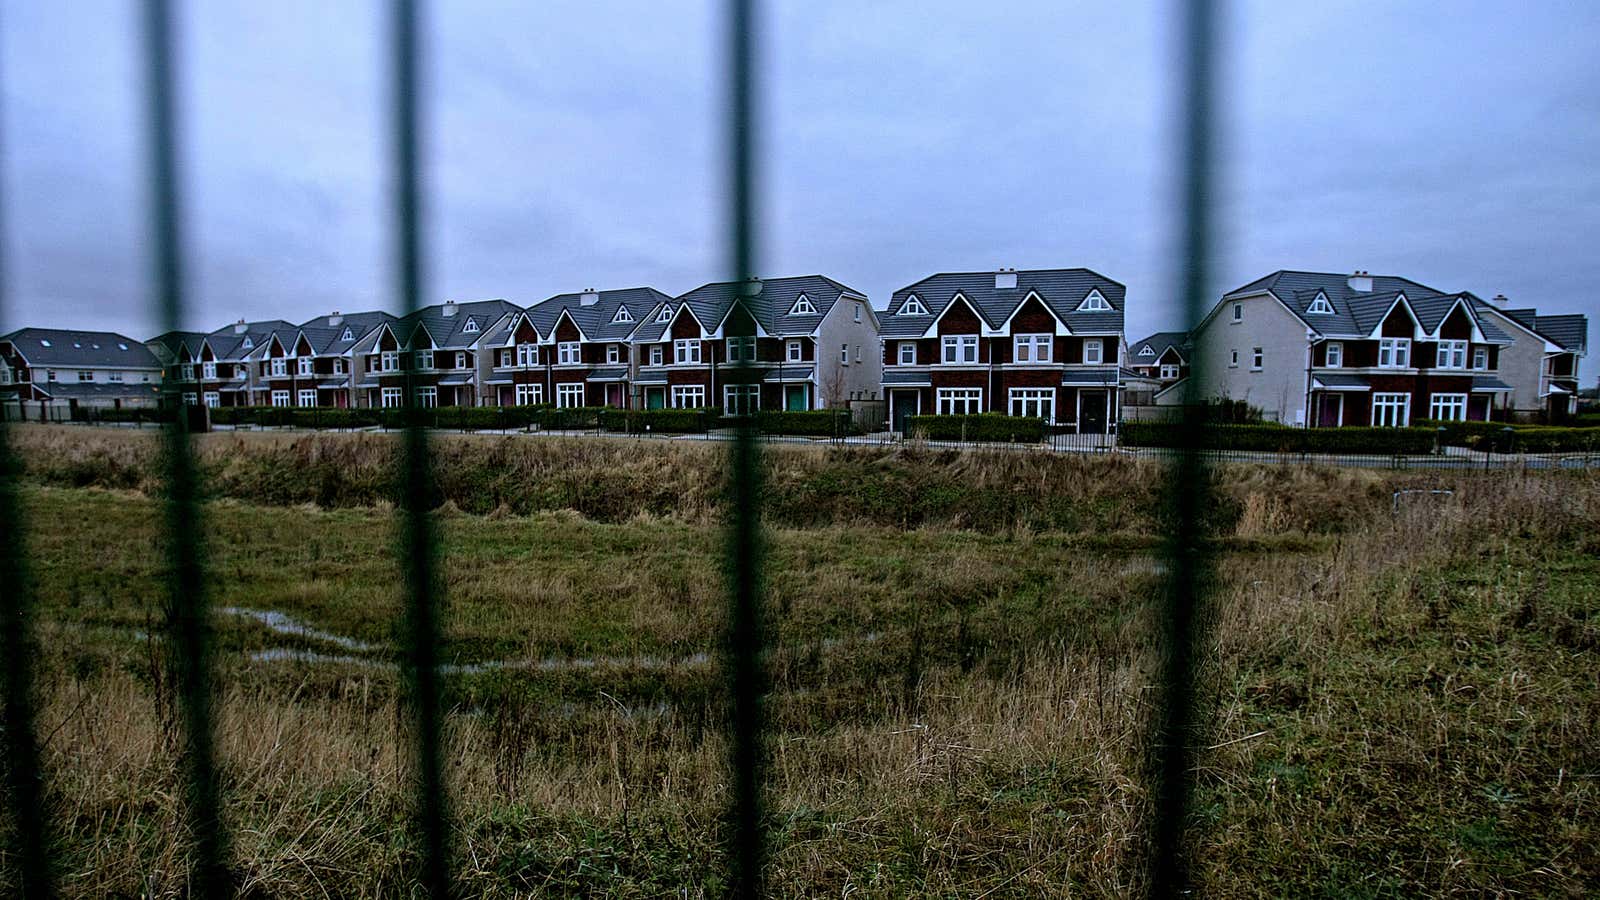 Belmayne, a large housing development north of Dublin launched amid much fanfare in 2007, posted a loss of €144 million in 2010, the last year of its reports. It is now in receivership.